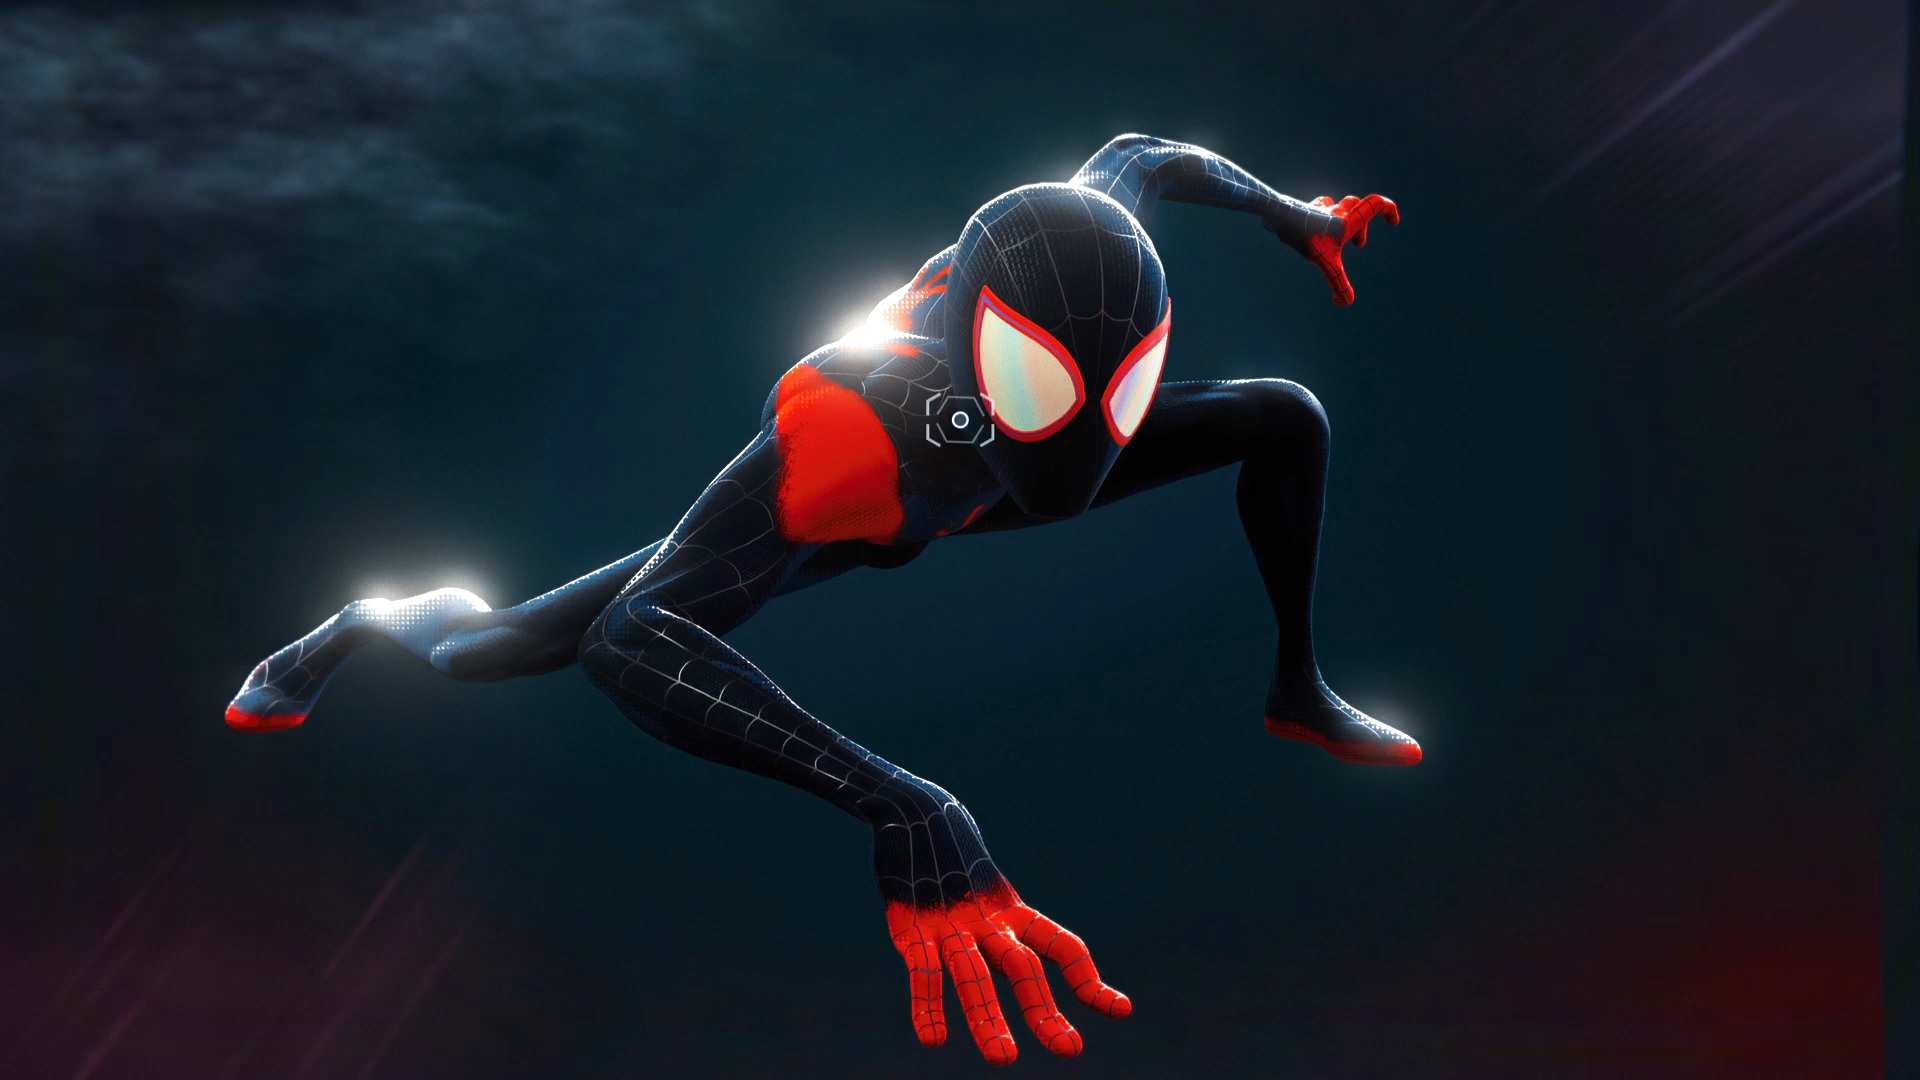 Top 35+ imagen miles morales spiderman into the spiderverse - Abzlocal.mx